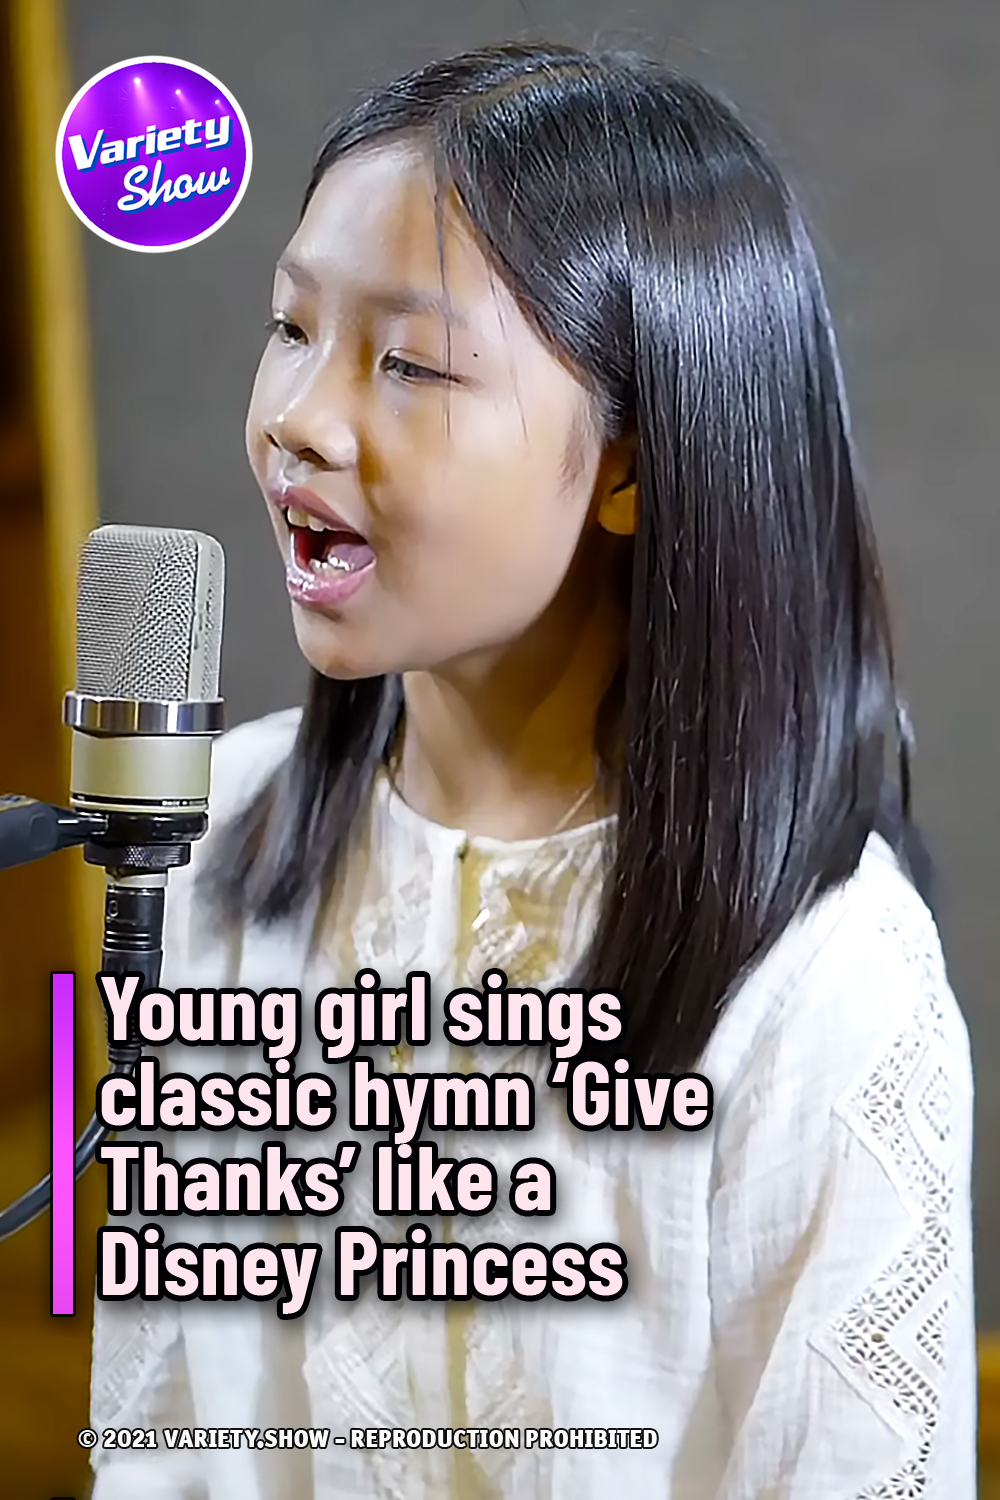 Young girl sings classic hymn ‘Give Thanks’ like a Disney Princess